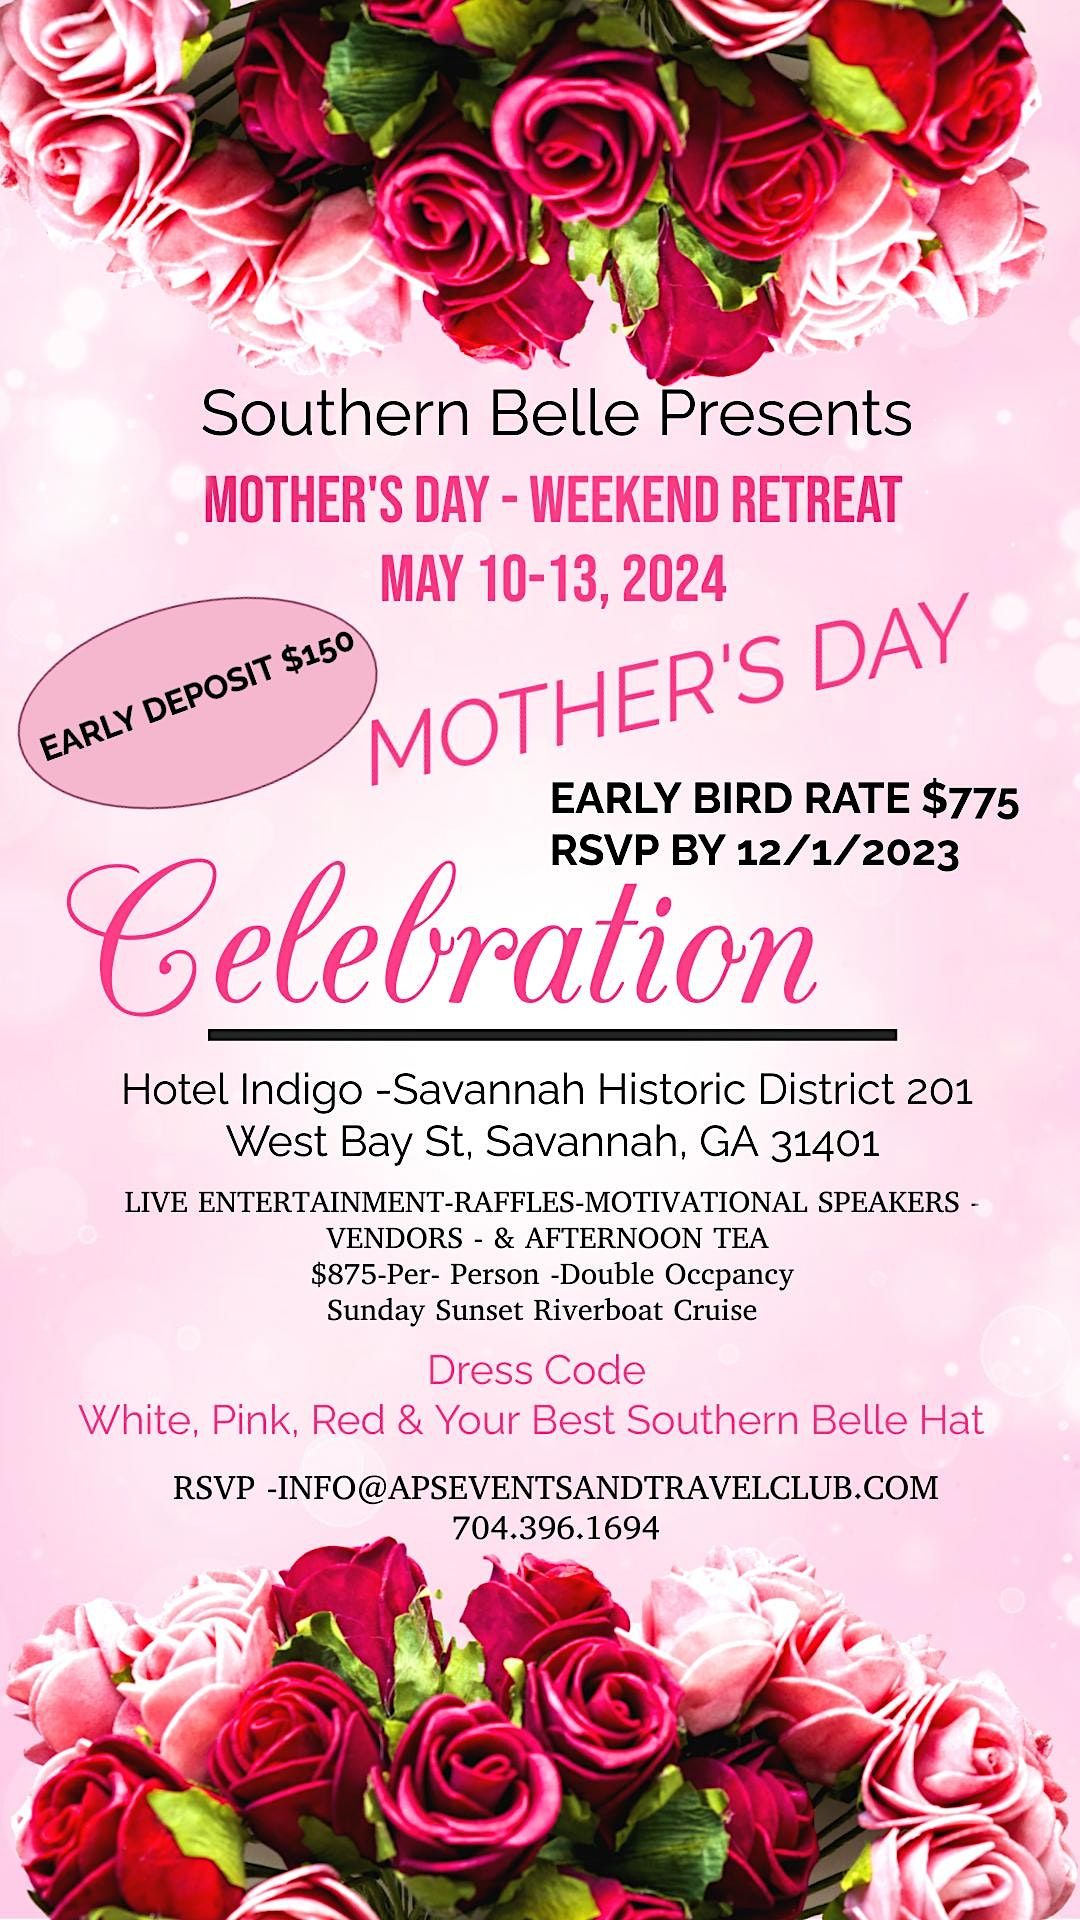 SOUTHERN BELLE PRESENTS  - MOTHER'S DAY - WEEKEND RETREAT